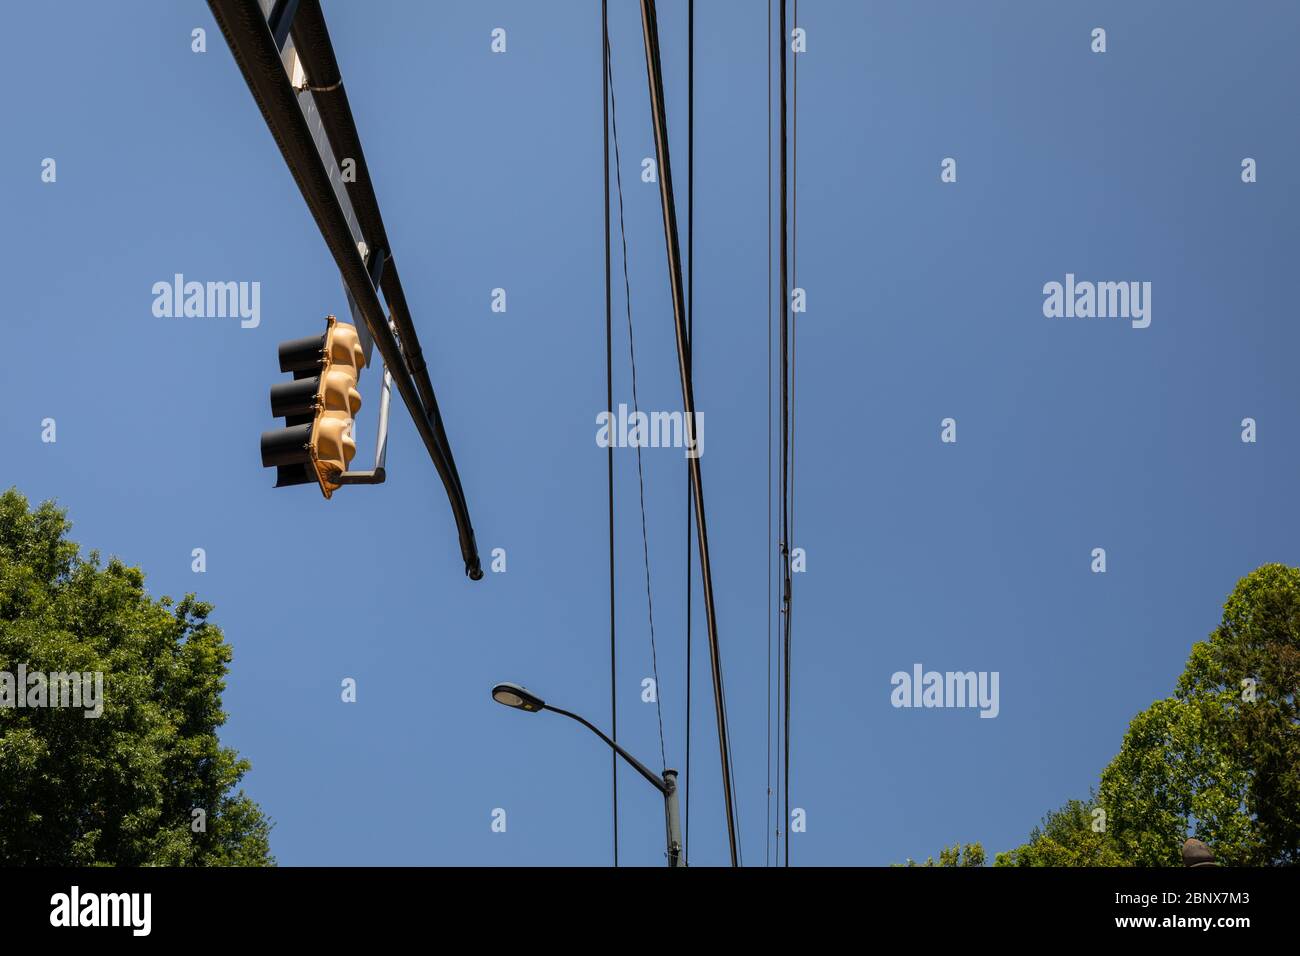 Overhead mast arm with traffic light, power lines and street light against blue sky with trees on lower border, horizontal aspect Stock Photo